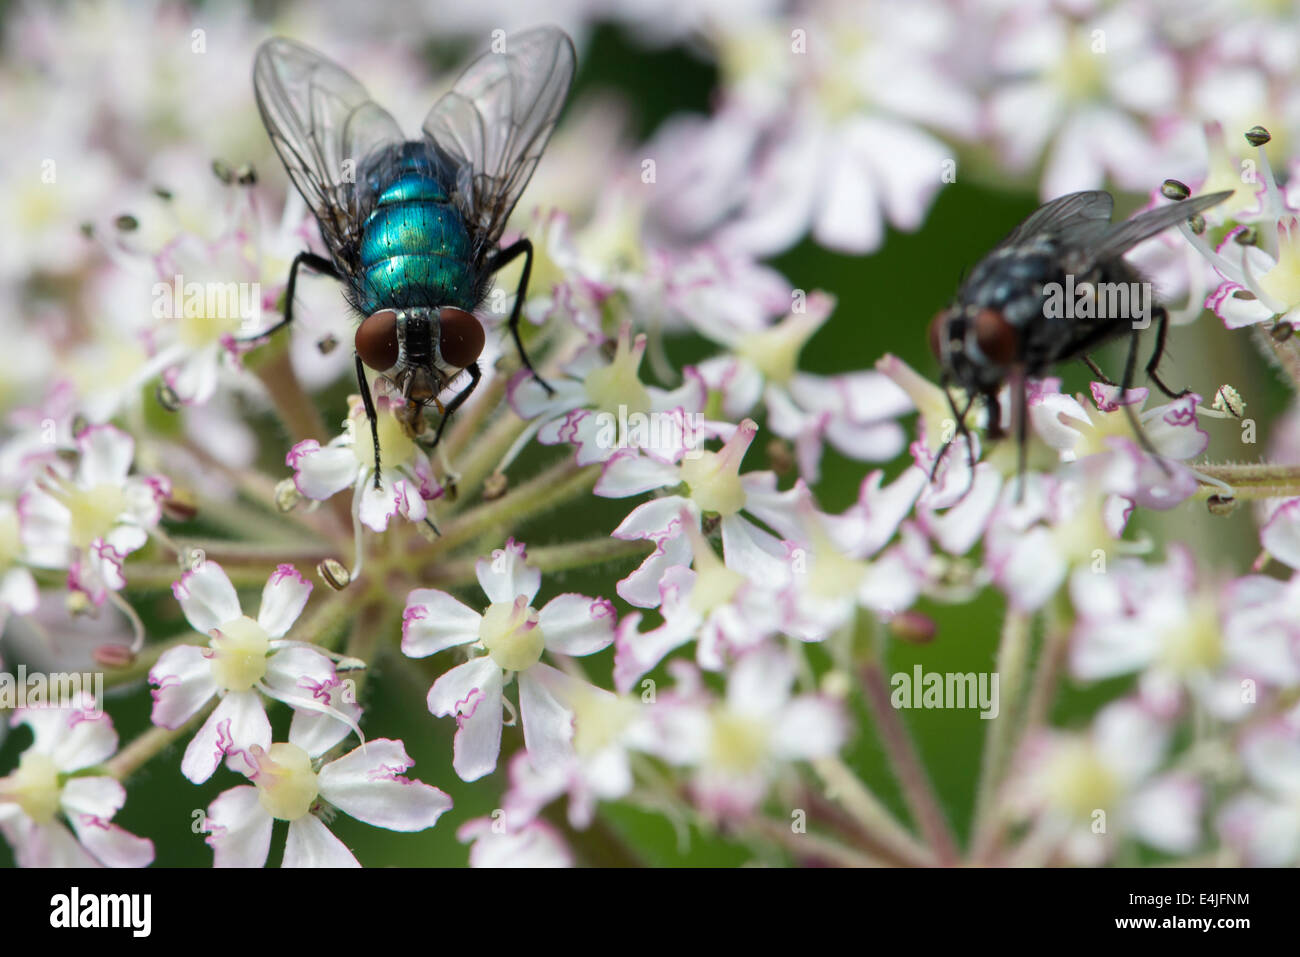 Green bottle fly on a cow parsley flower in a Cumbrian meadow Stock Photo